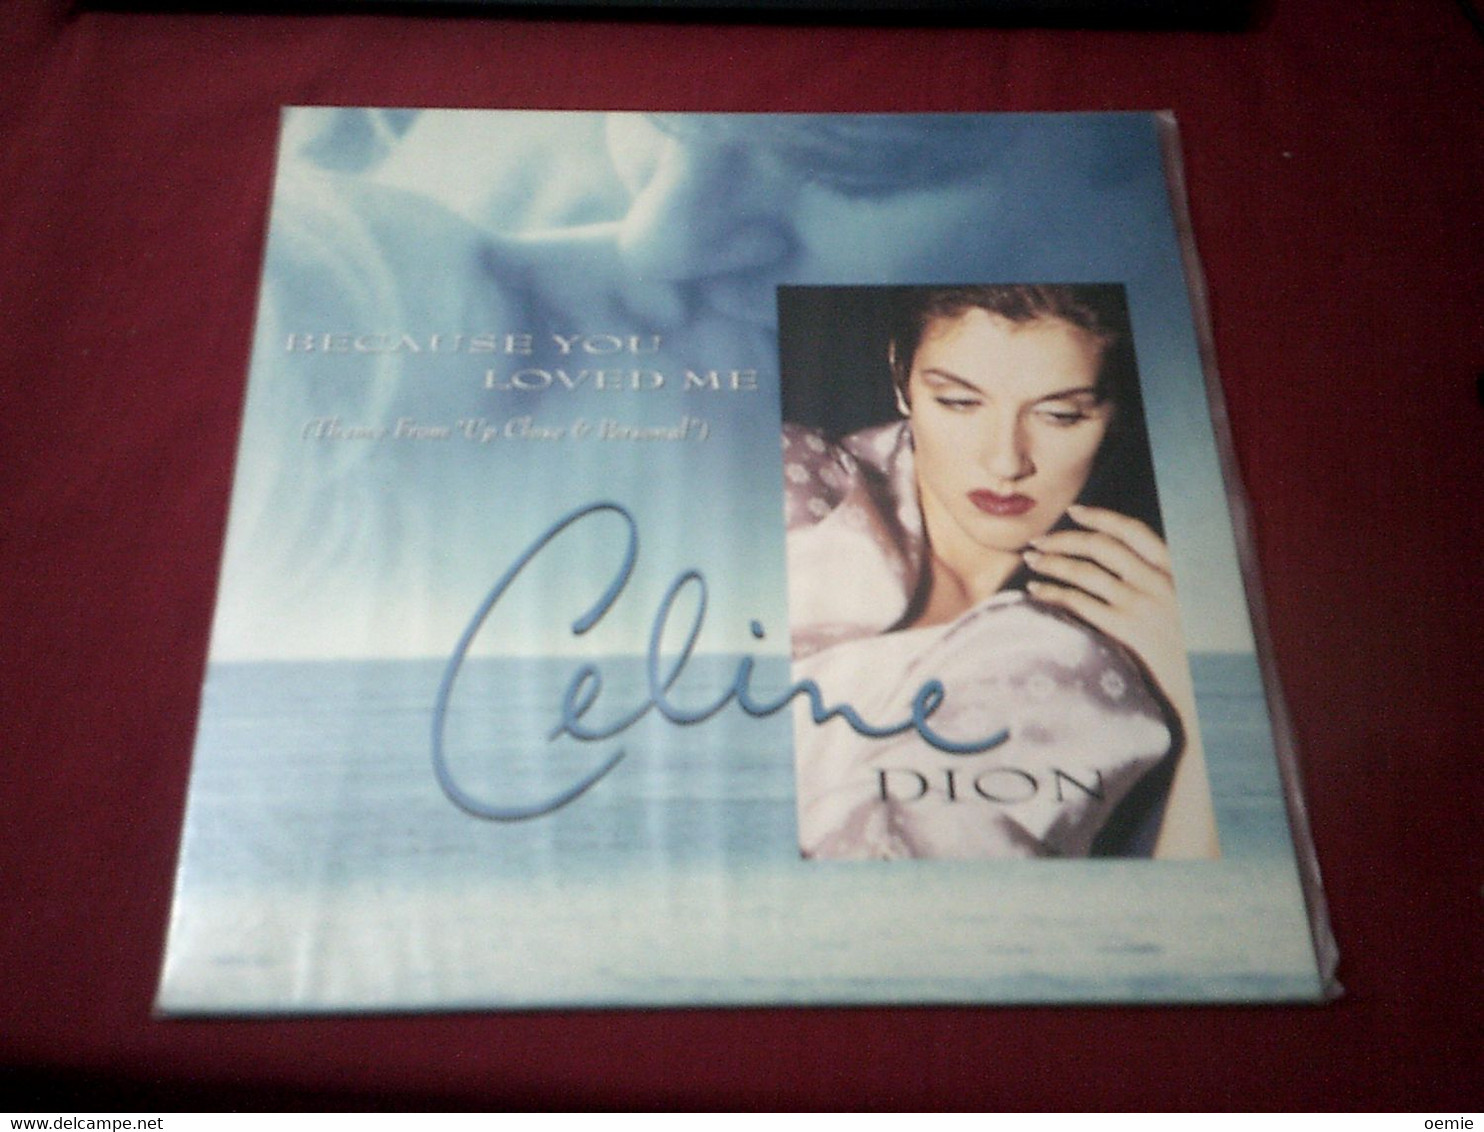 CELINE  DION   °  BECAUSE YOU LOVED ME - 45 T - Maxi-Single